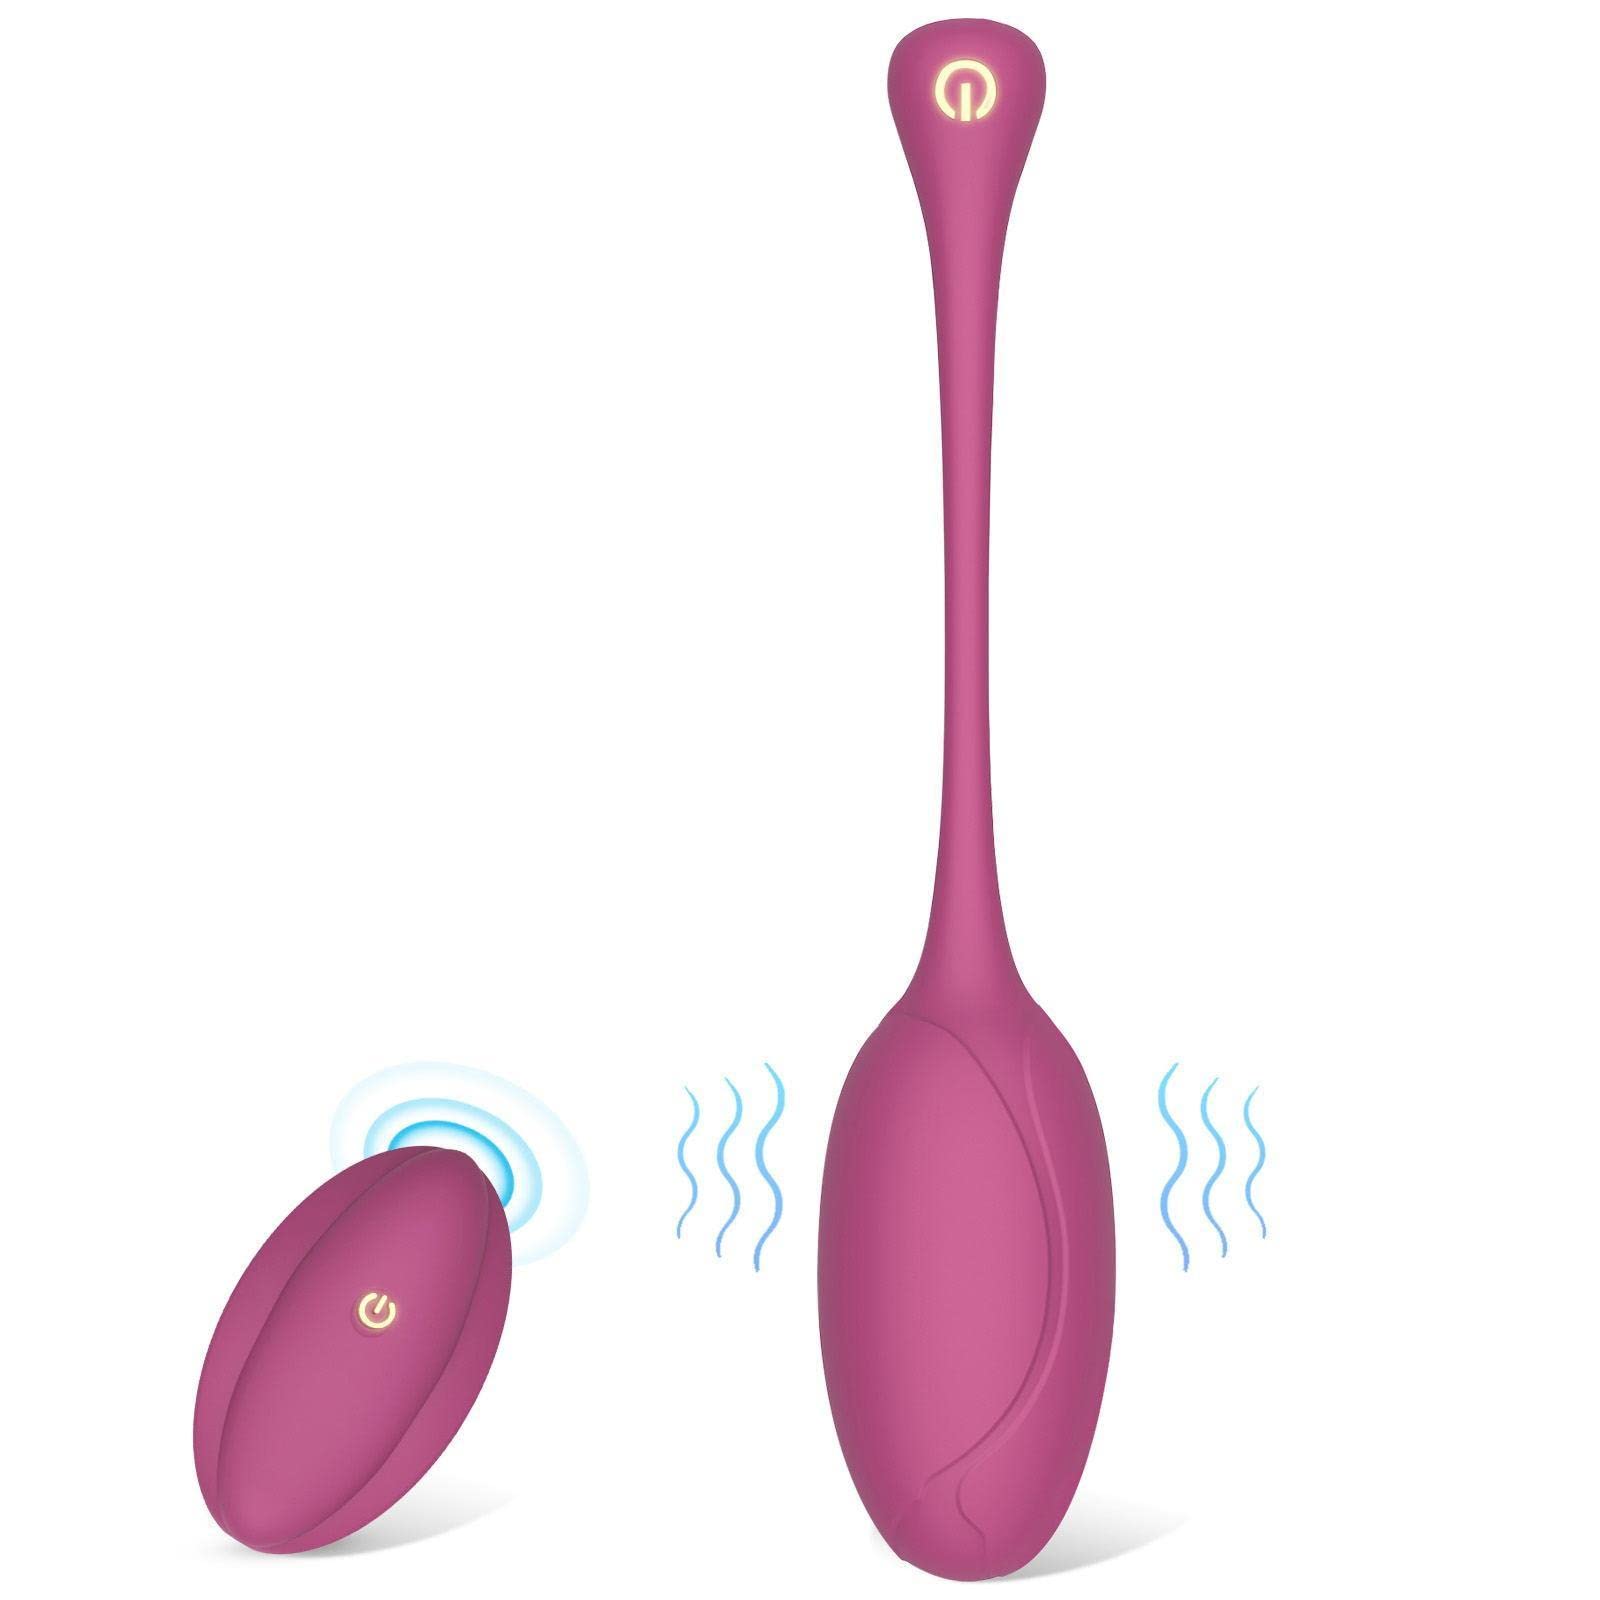 aland#8217;ofa + Bullet Vibrator Vibrating Eggs, Adult Sex Toys Love Eggs for G-Spot Stimulation, Vibrator for Women with Remote Control Adult Product pic